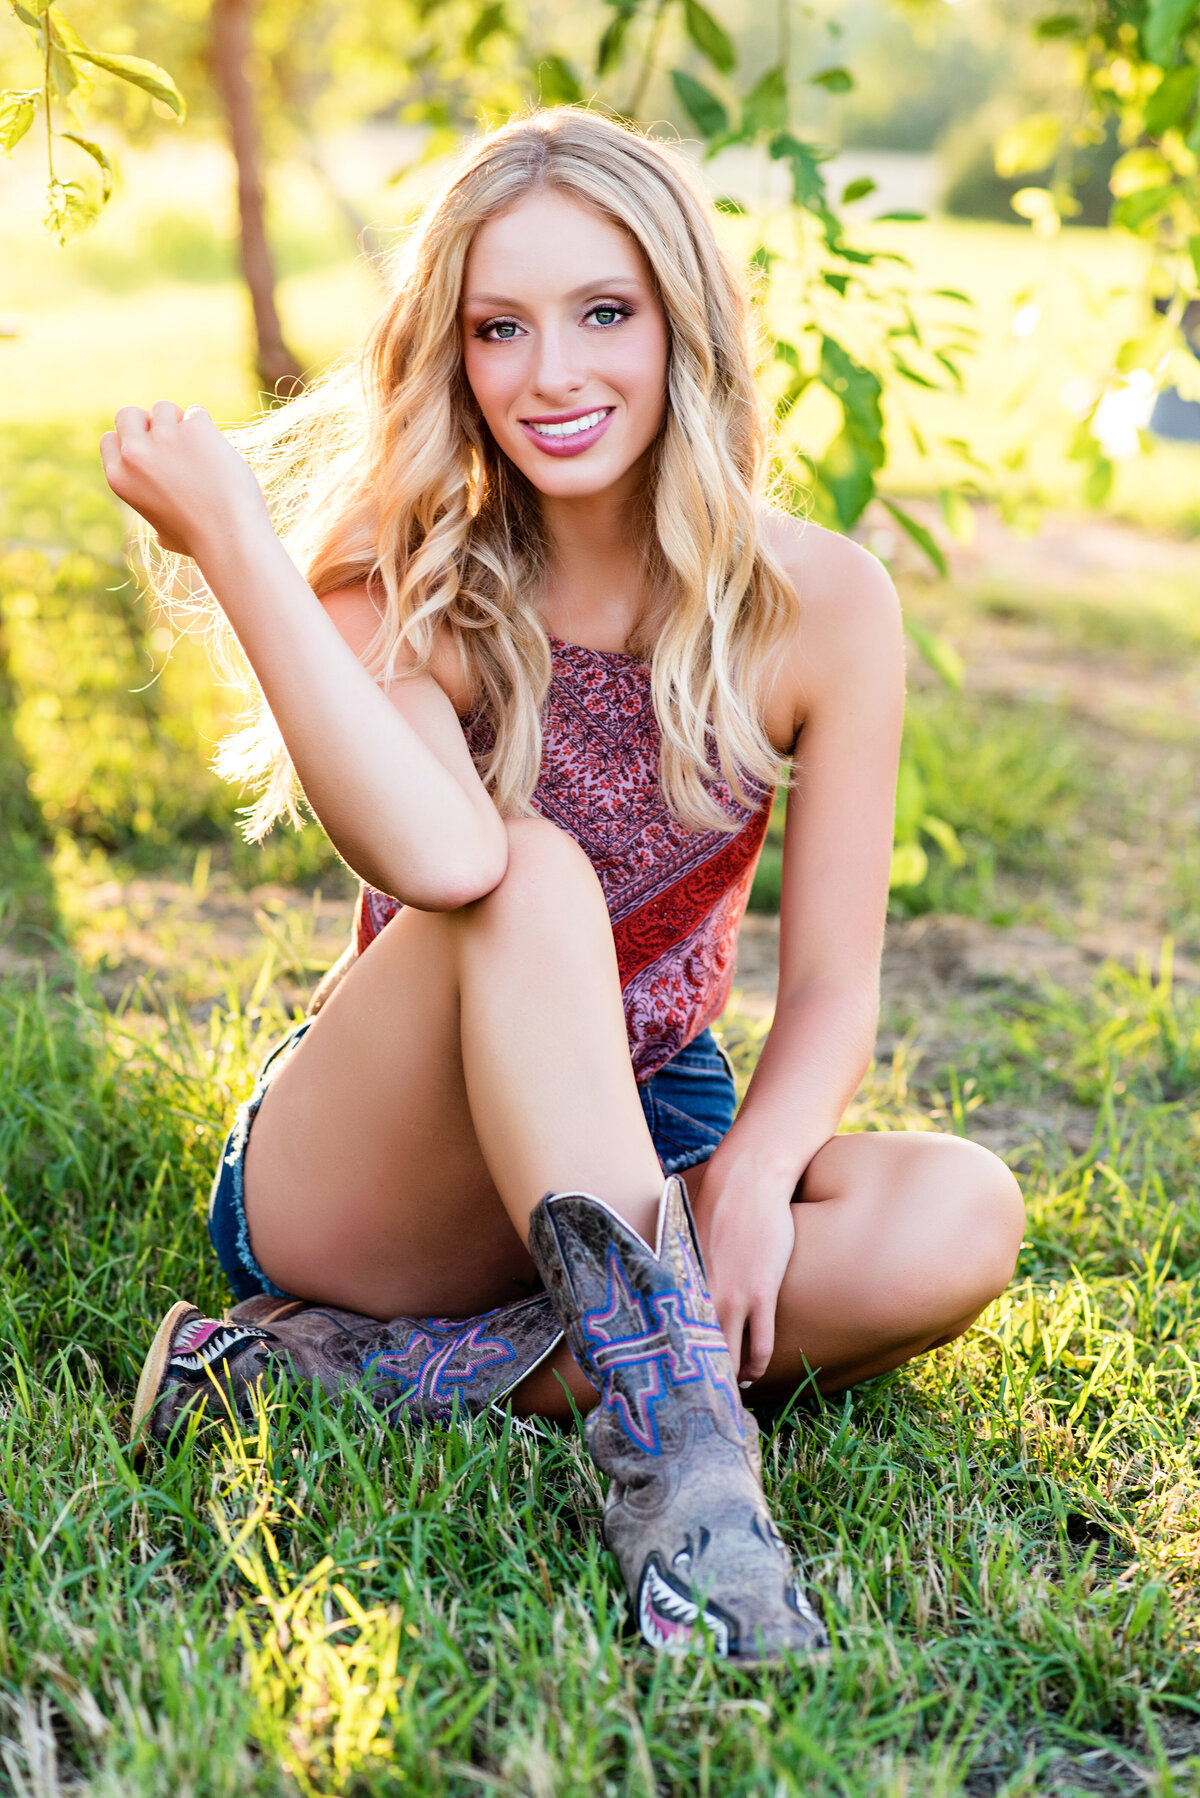 King William high school senior girl casually poses under tree wearing bandana top and cowboy boots for senior pictures.